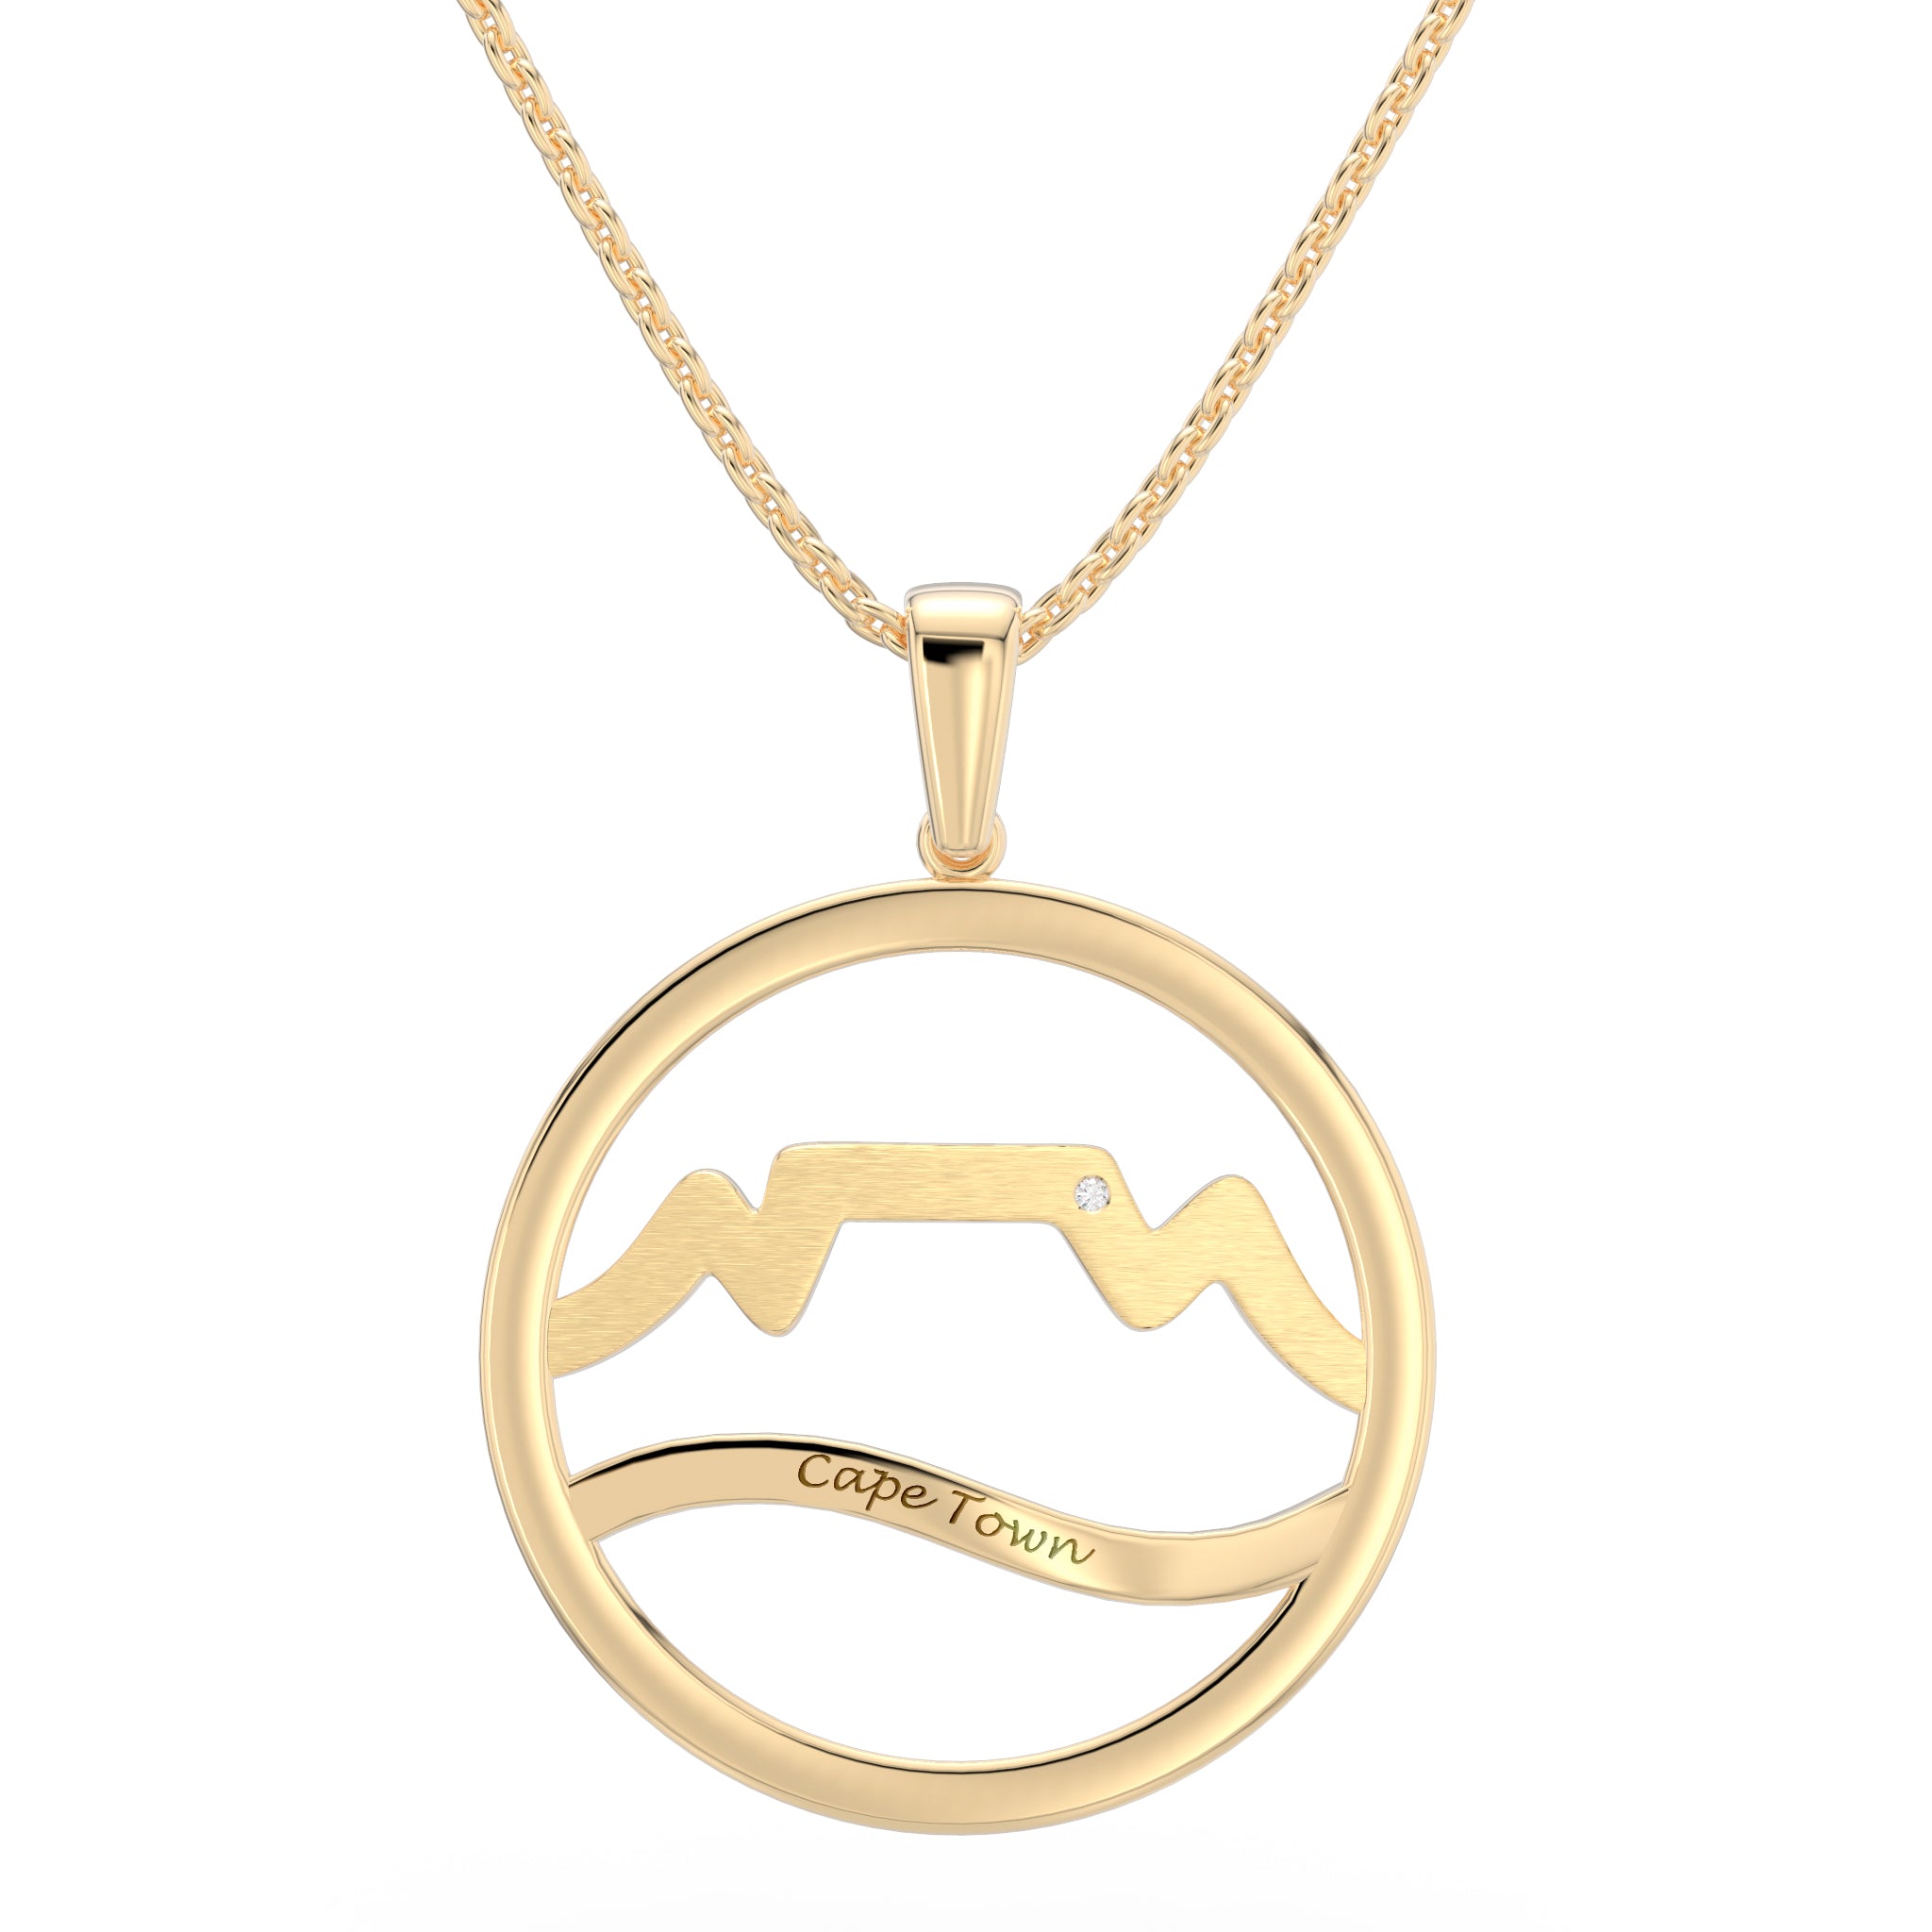 Cape Town Large Diamond Pendant in 14K Yellow Gold